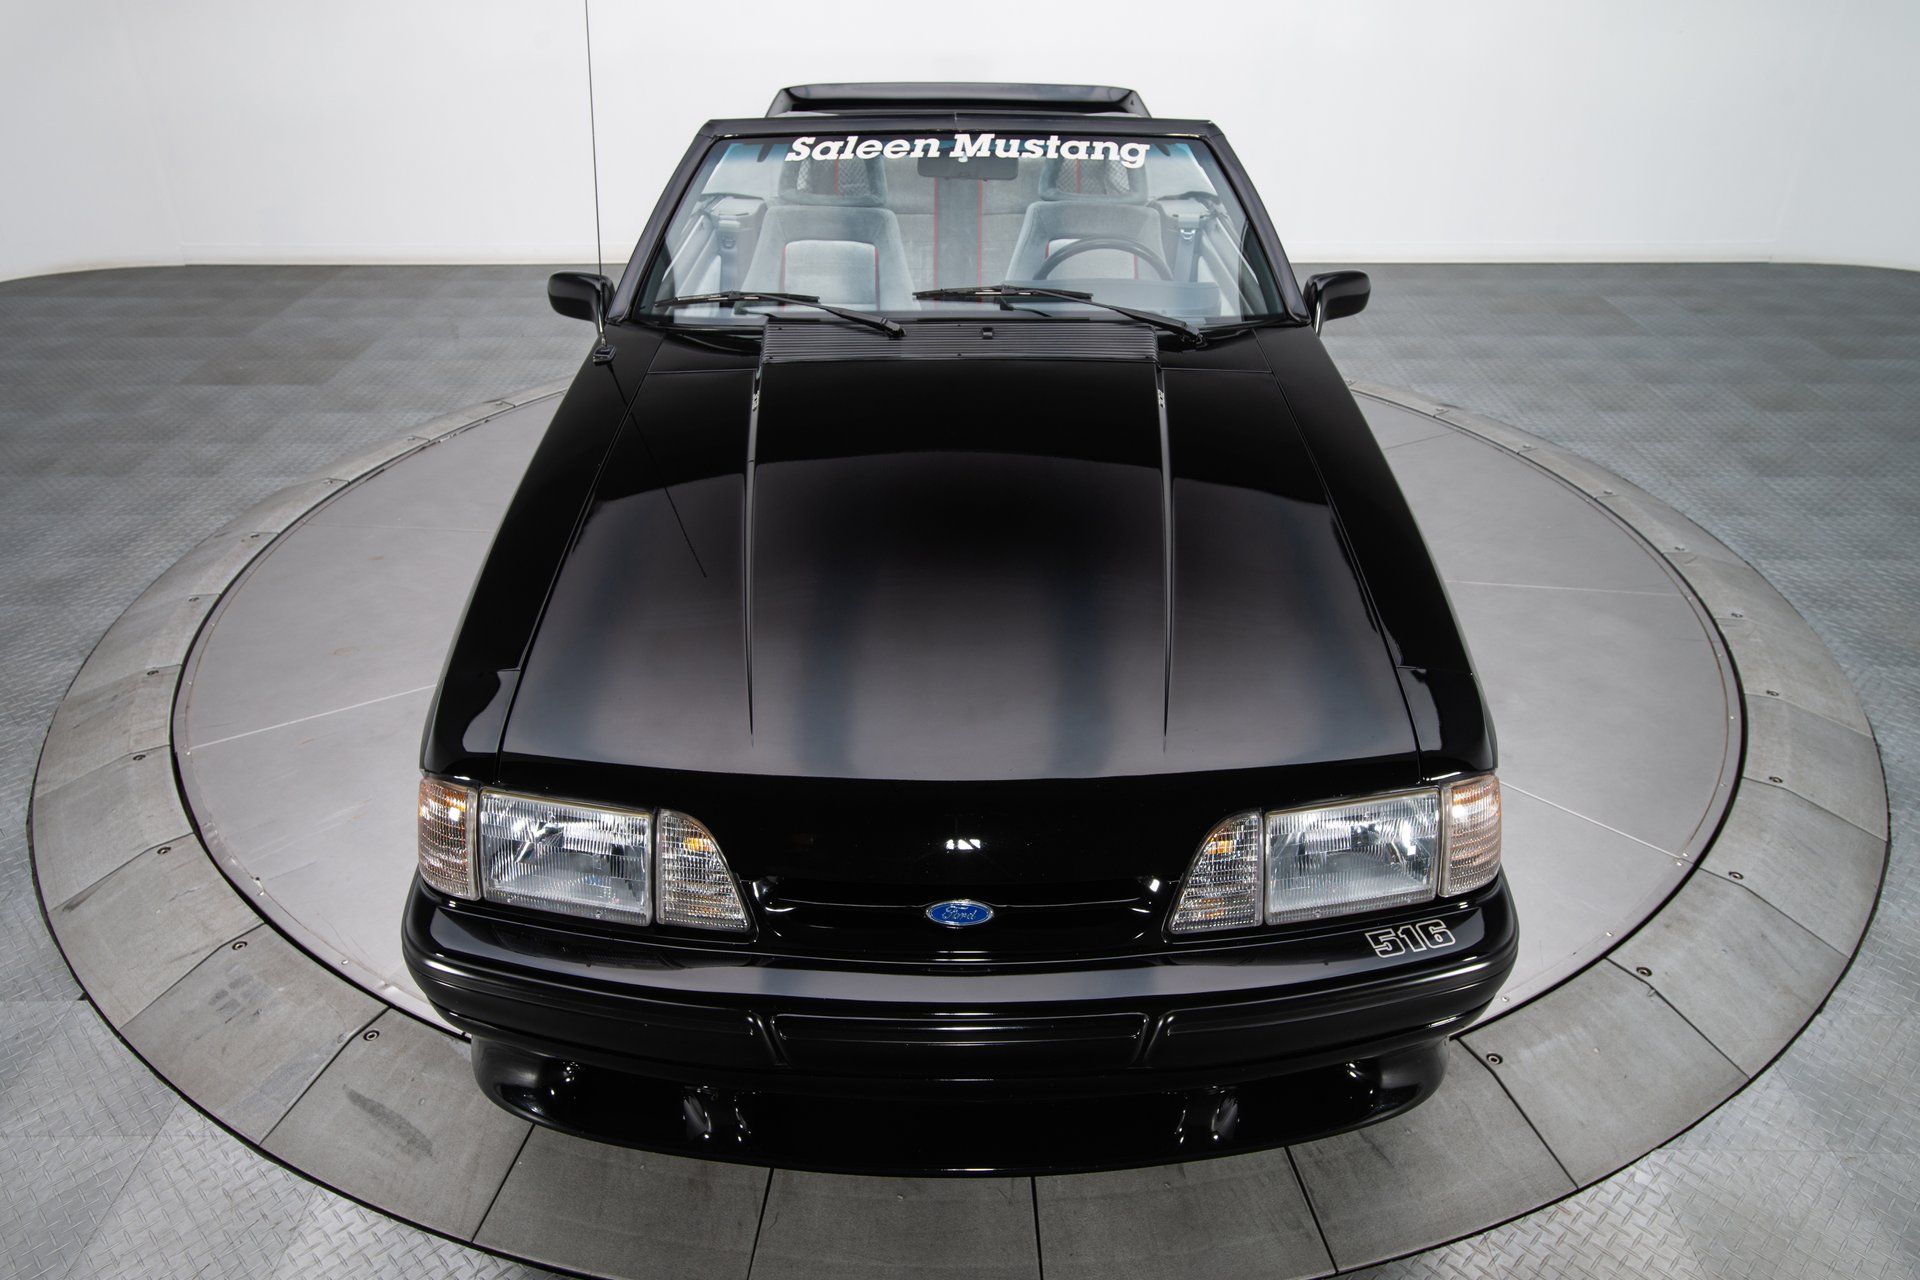 1988 ford mustang saleen